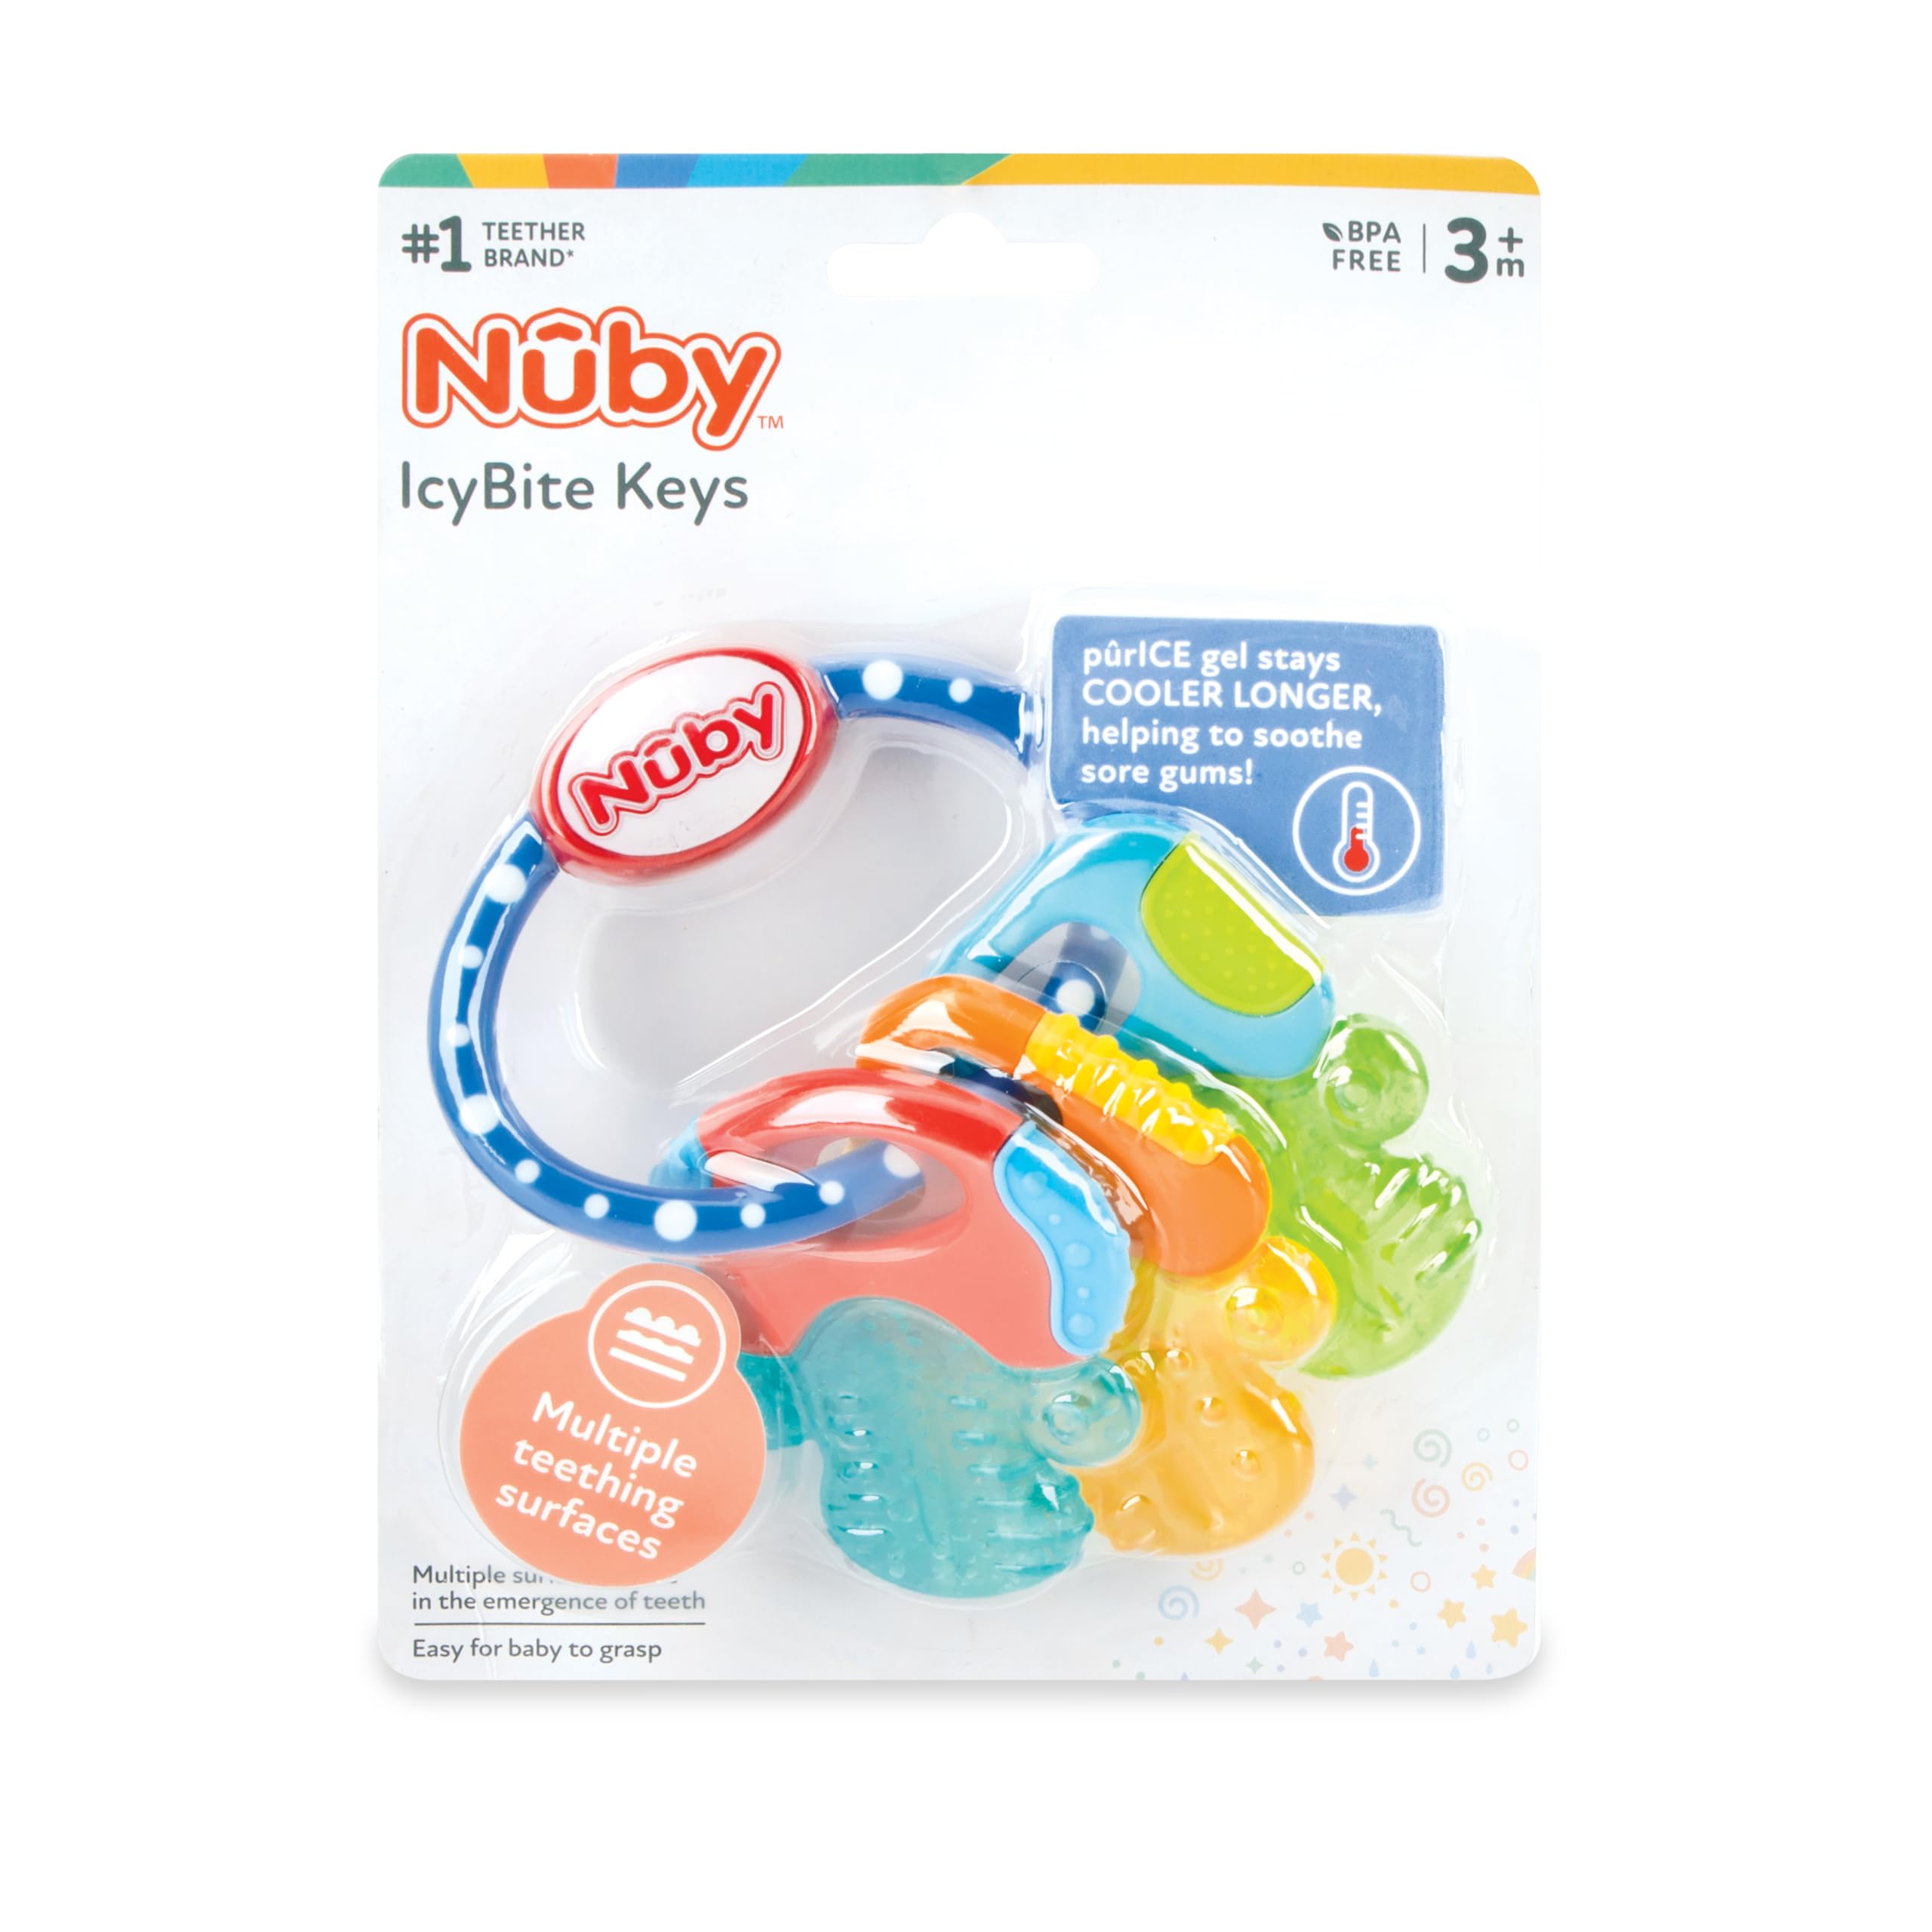 Nuby IcyBite Textured and Soothing Teether for Baby, Multicolor Keys - image 4 of 5